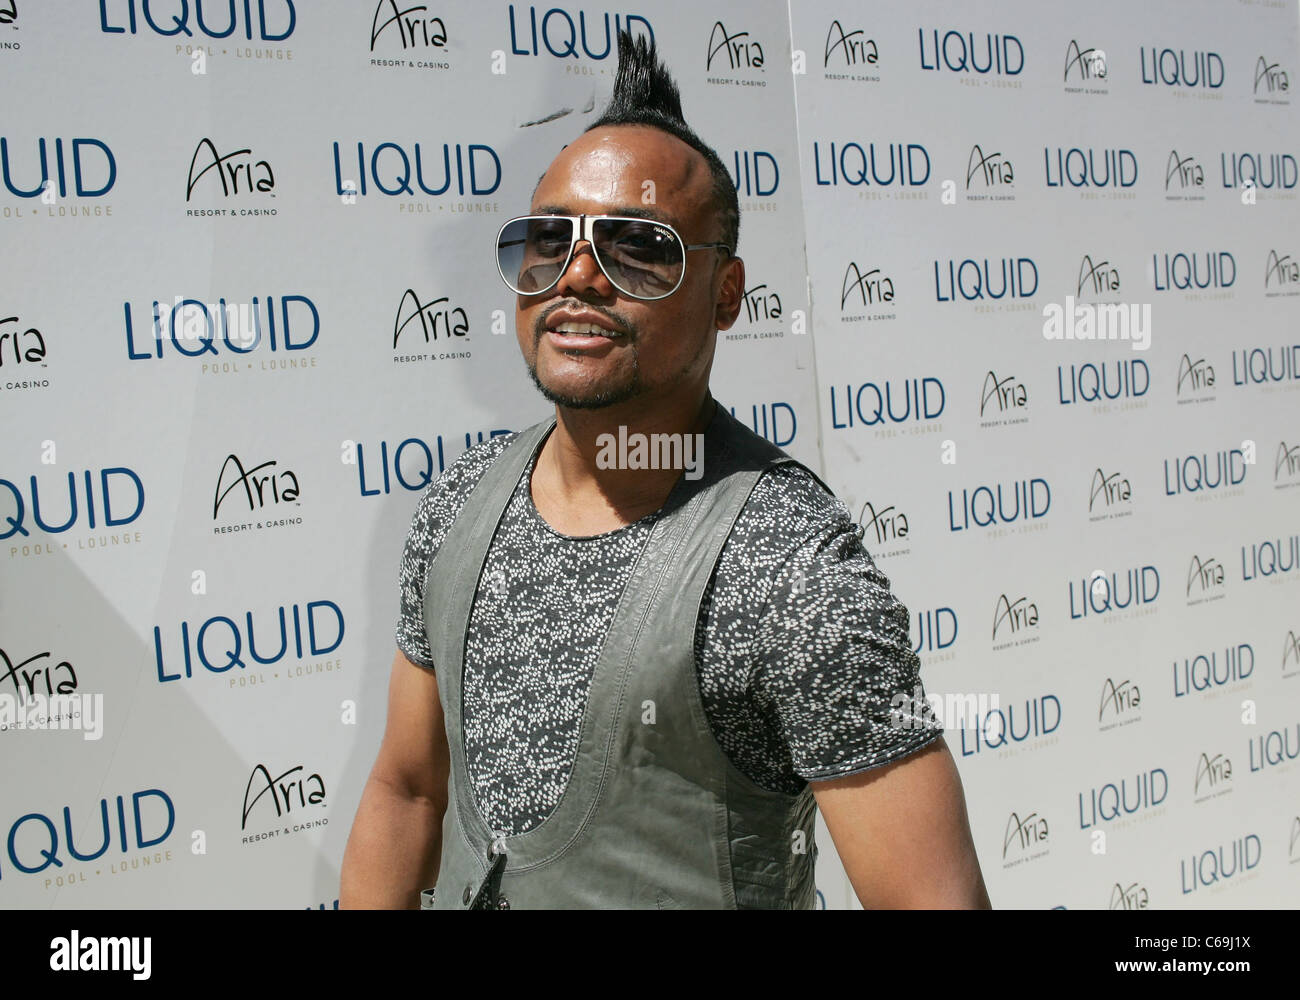 Apl.de.ap in attendance for Apl.de.ap Performs at Liquid Pool Lounge, Aria Resort and Casino at City Center, Las Vegas, NV May 7, 2011. Photo By: James Atoa/Everett Collection Stock Photo